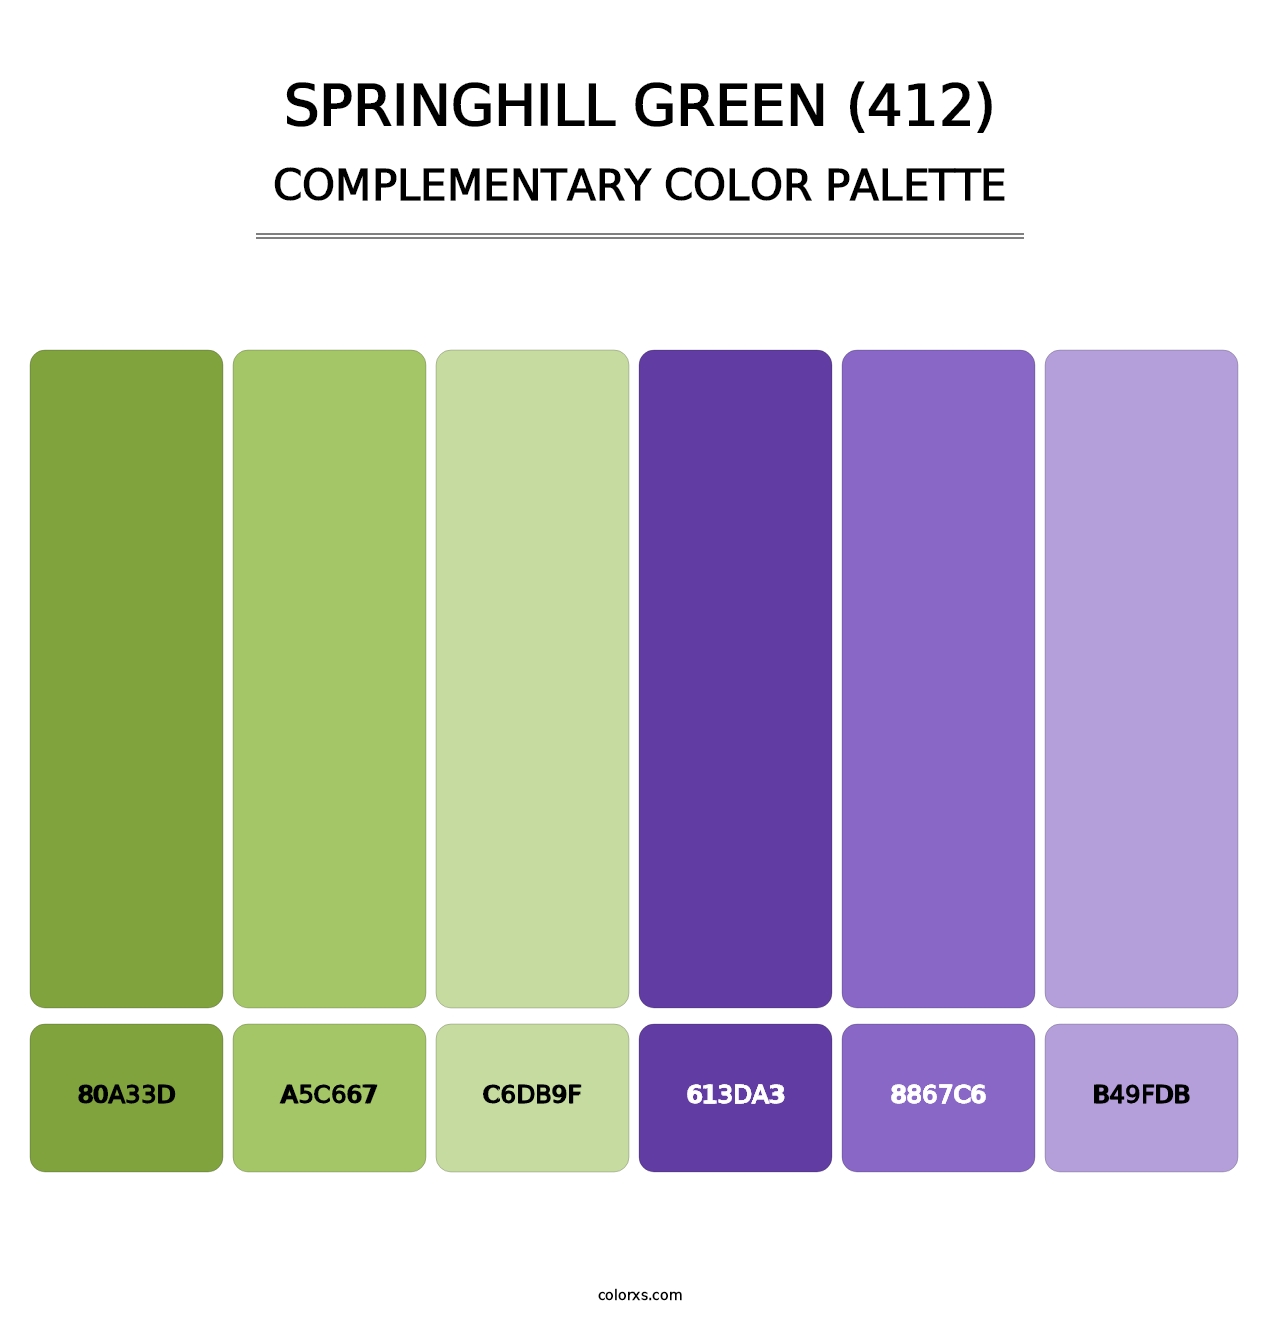 Springhill Green (412) - Complementary Color Palette